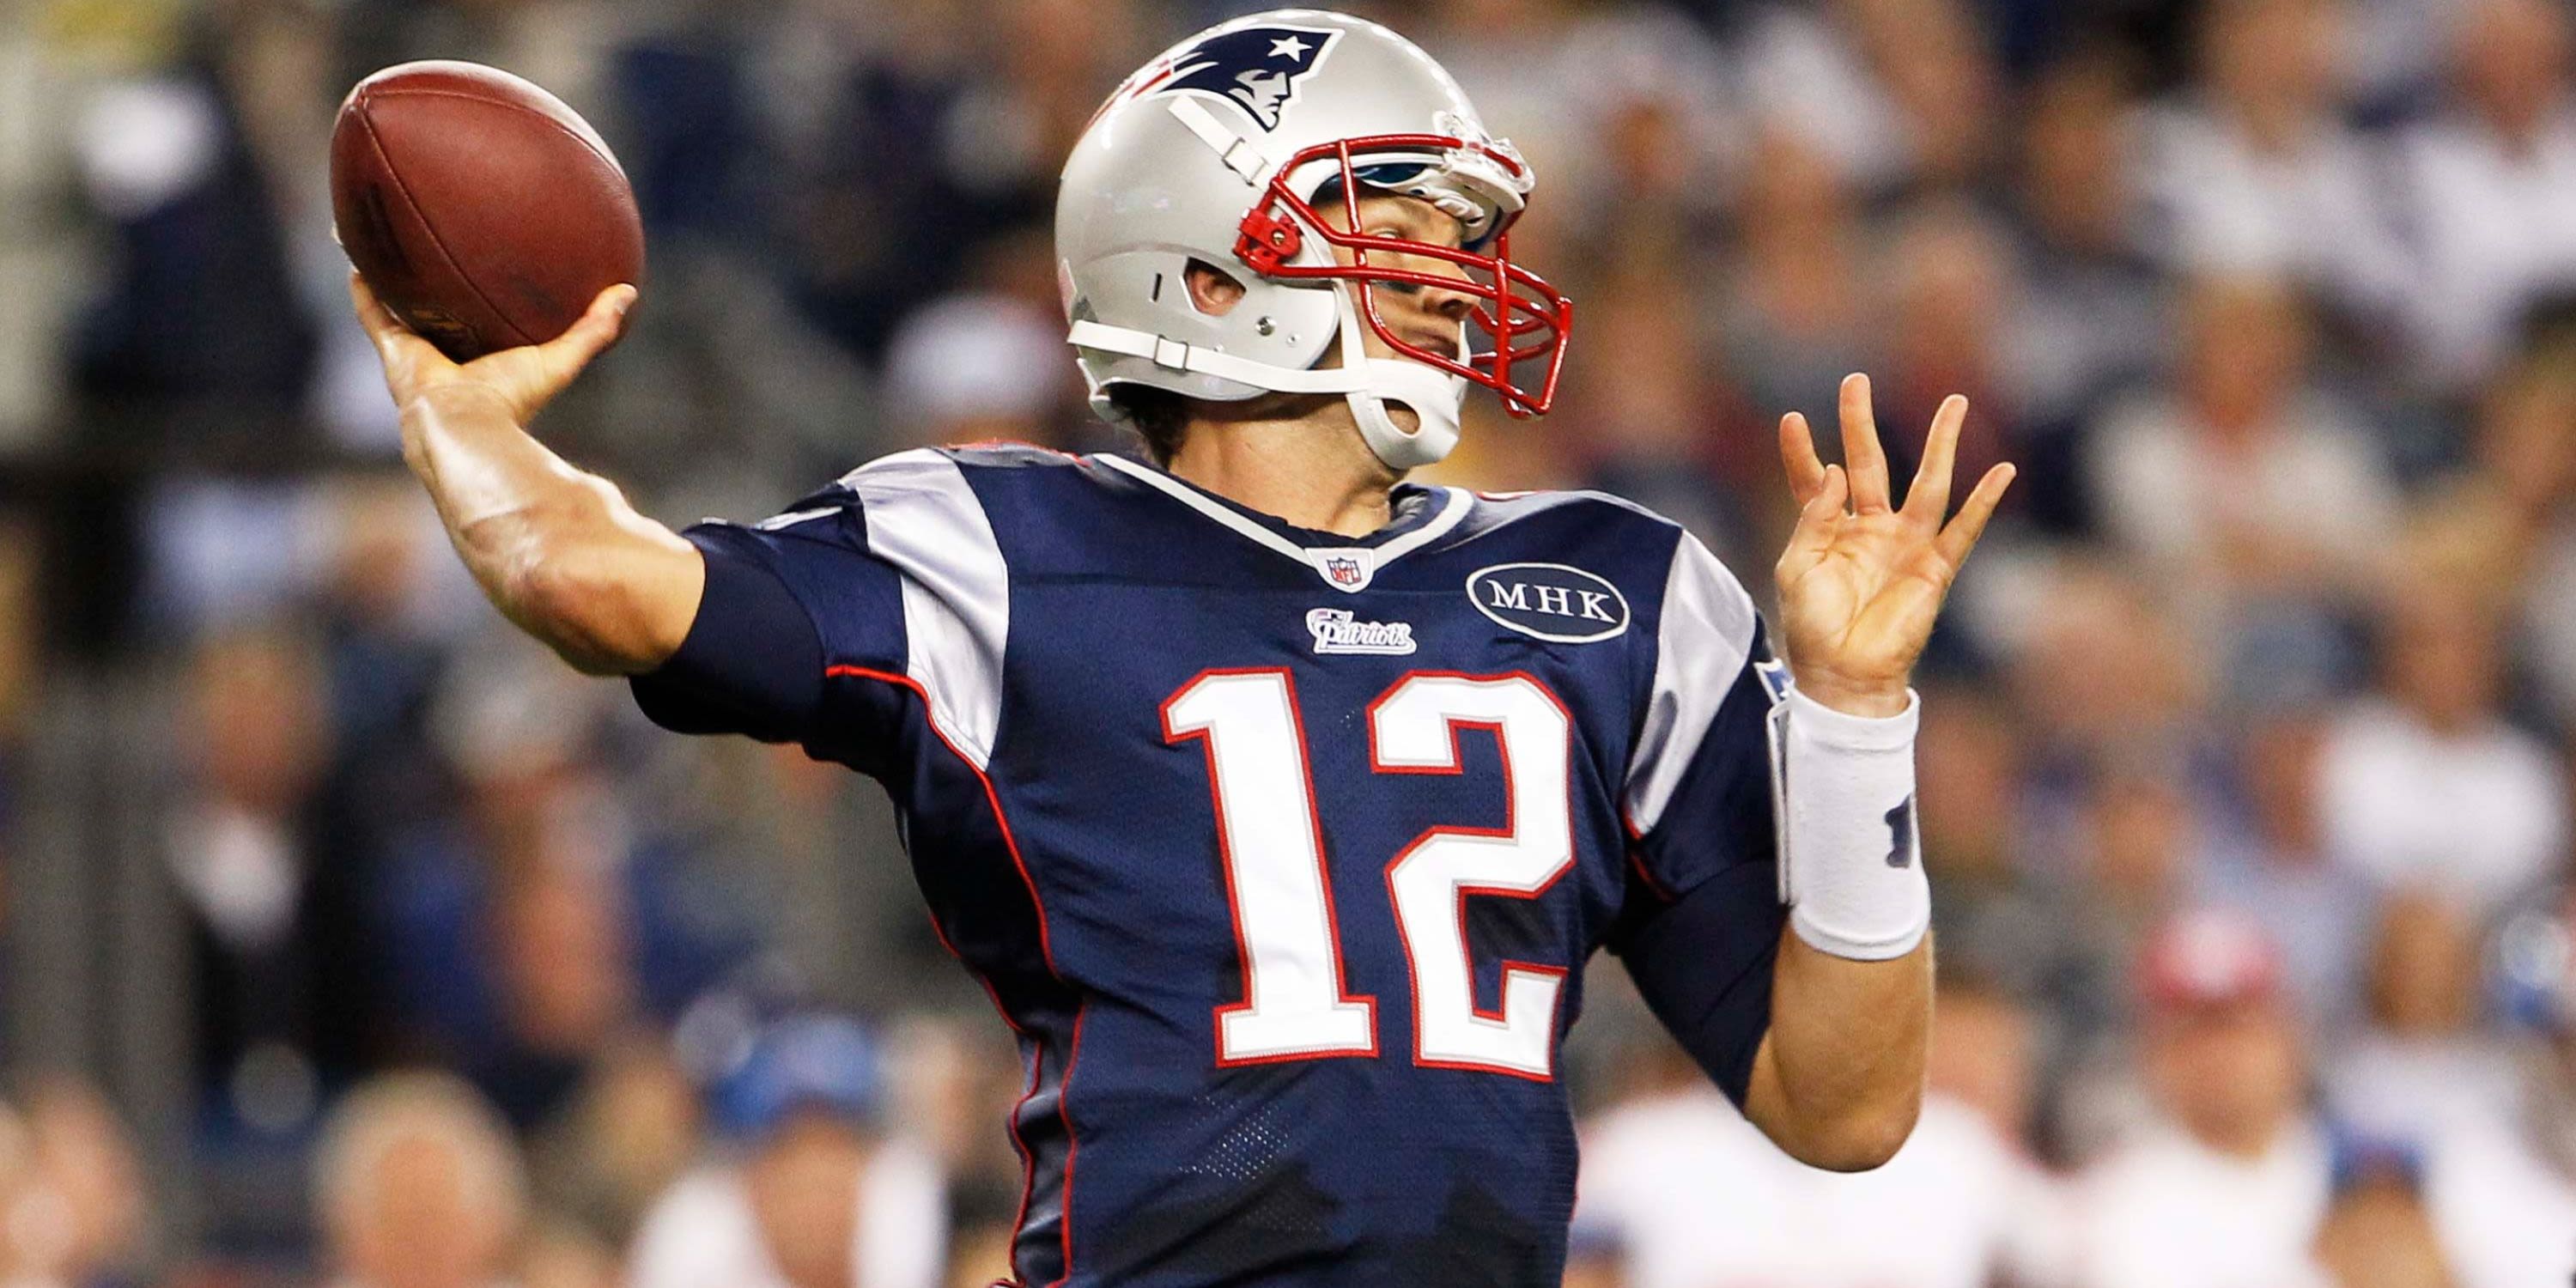 Ranking the 5 Best New England Patriots Players of All Time